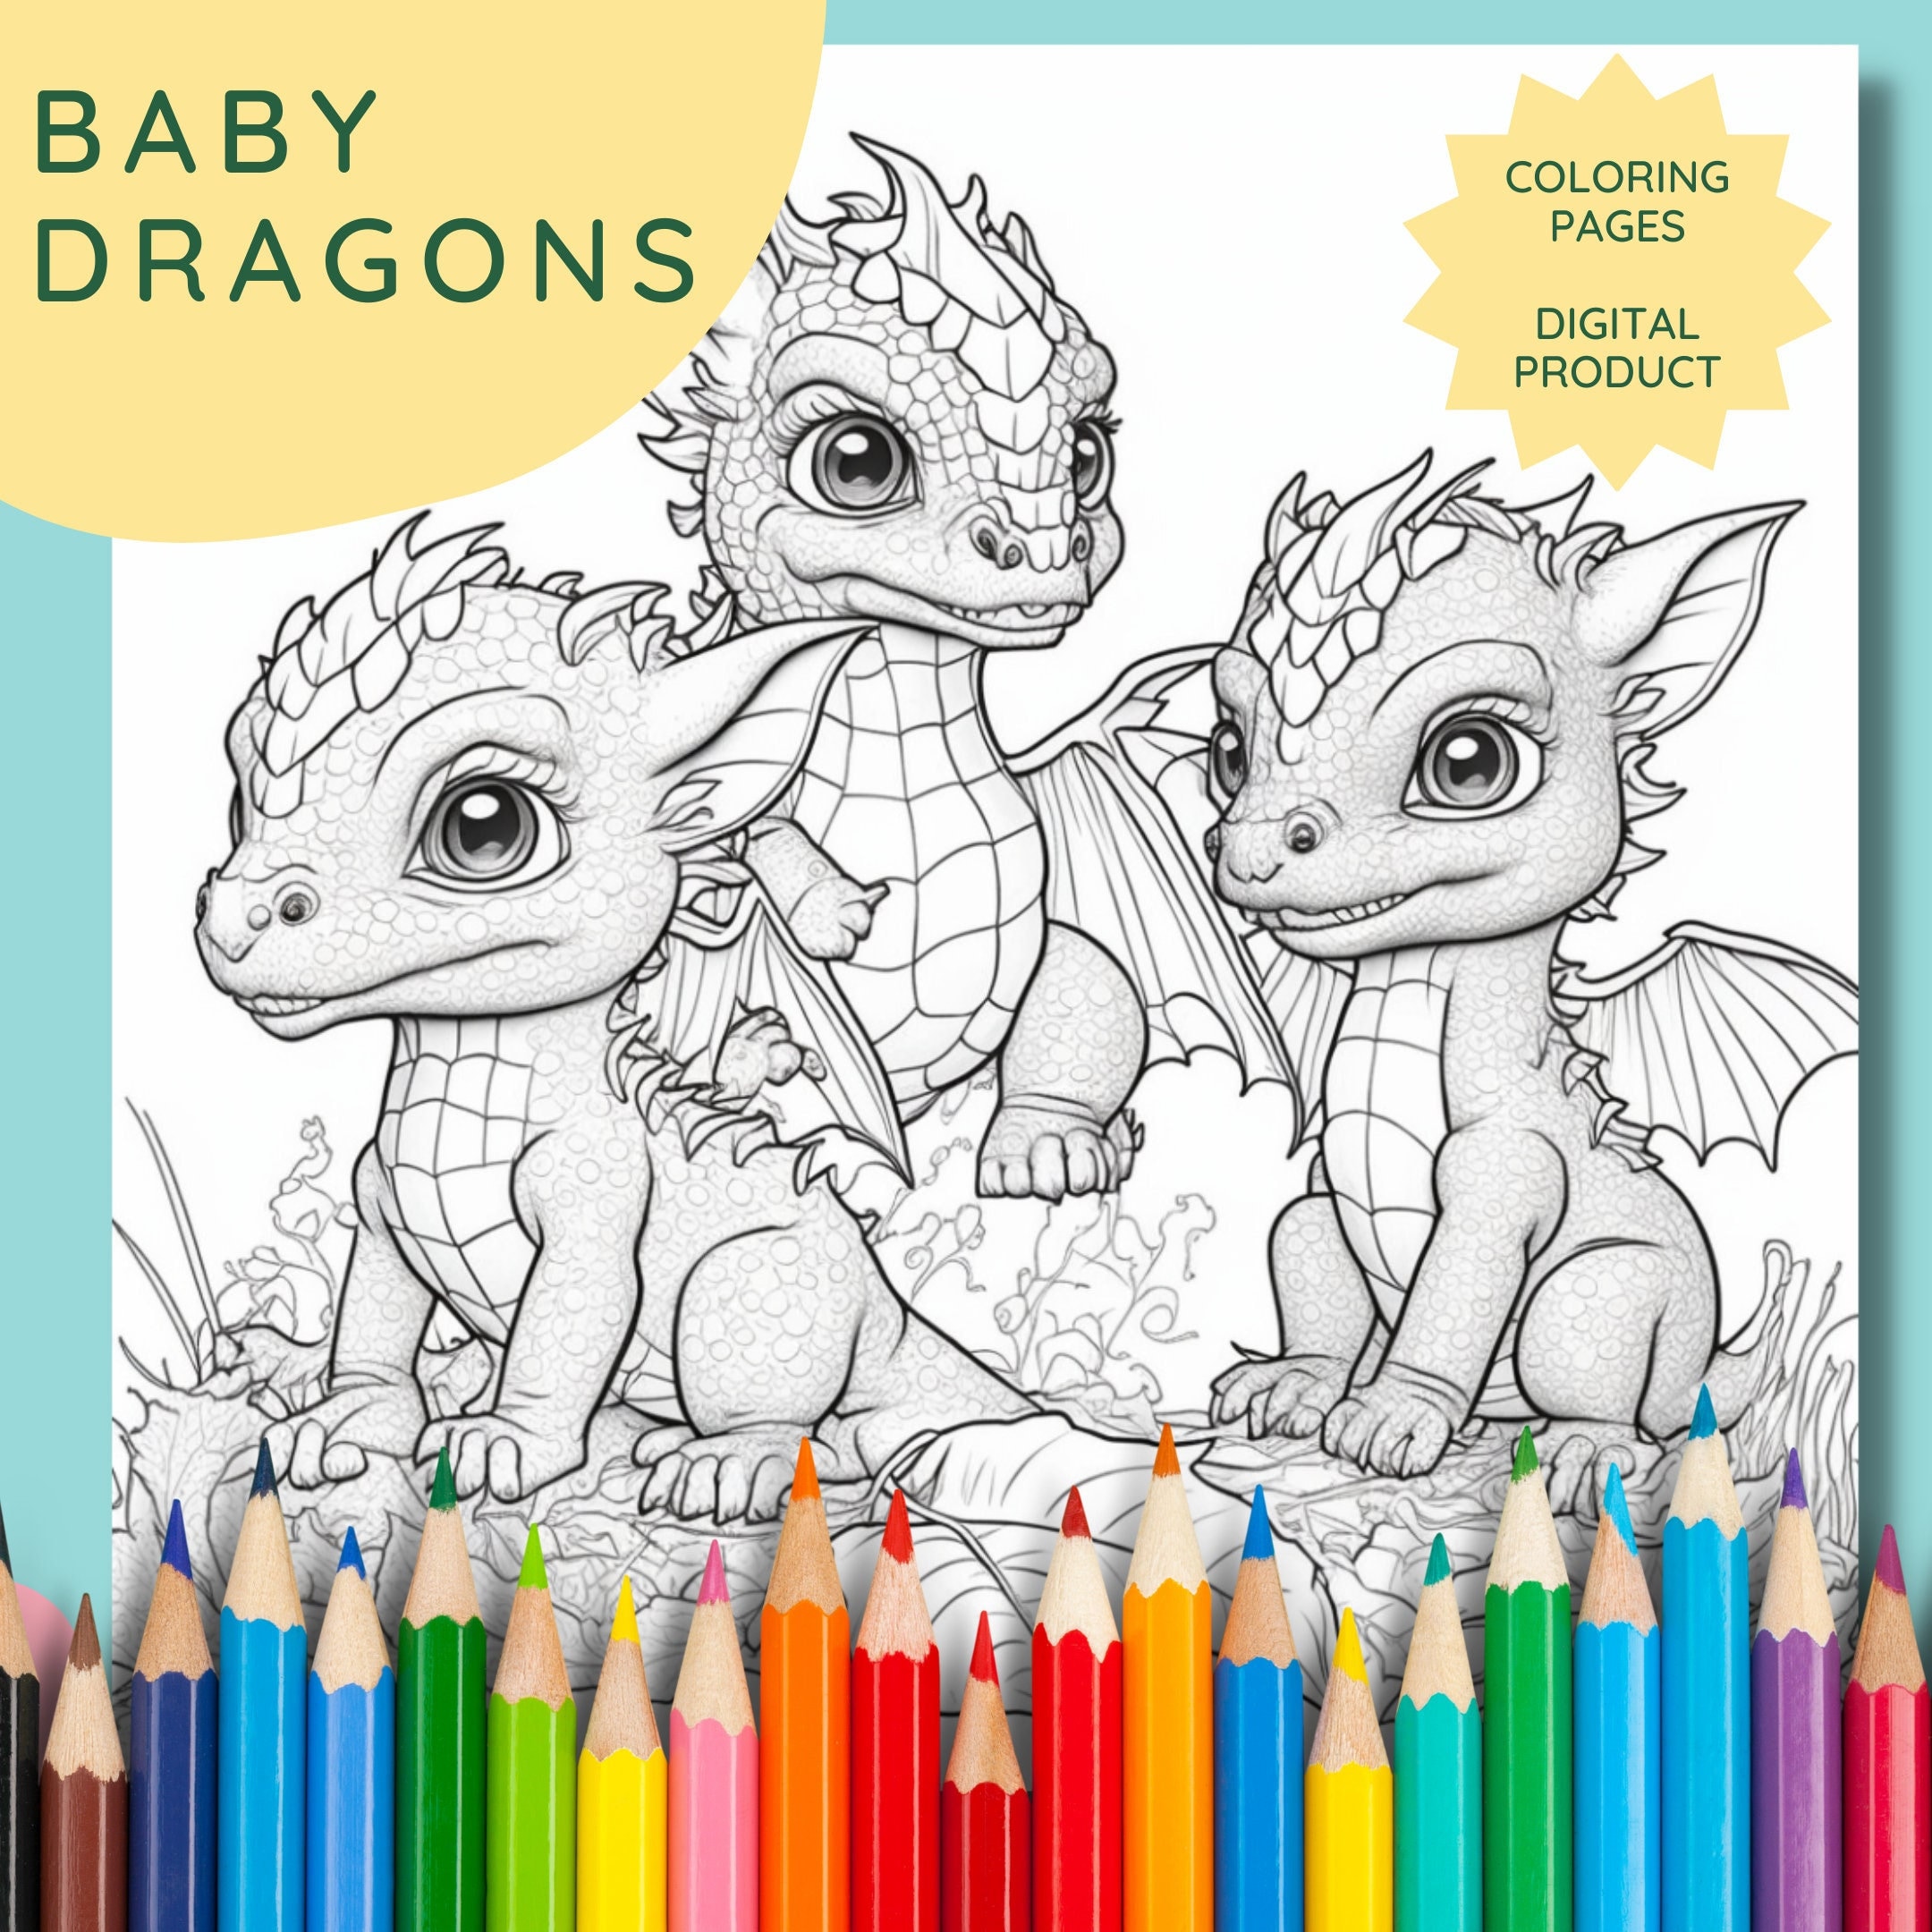 Coloring games baby dragons coloring pages printable holiday games keep the kids busy birthday kids games diy